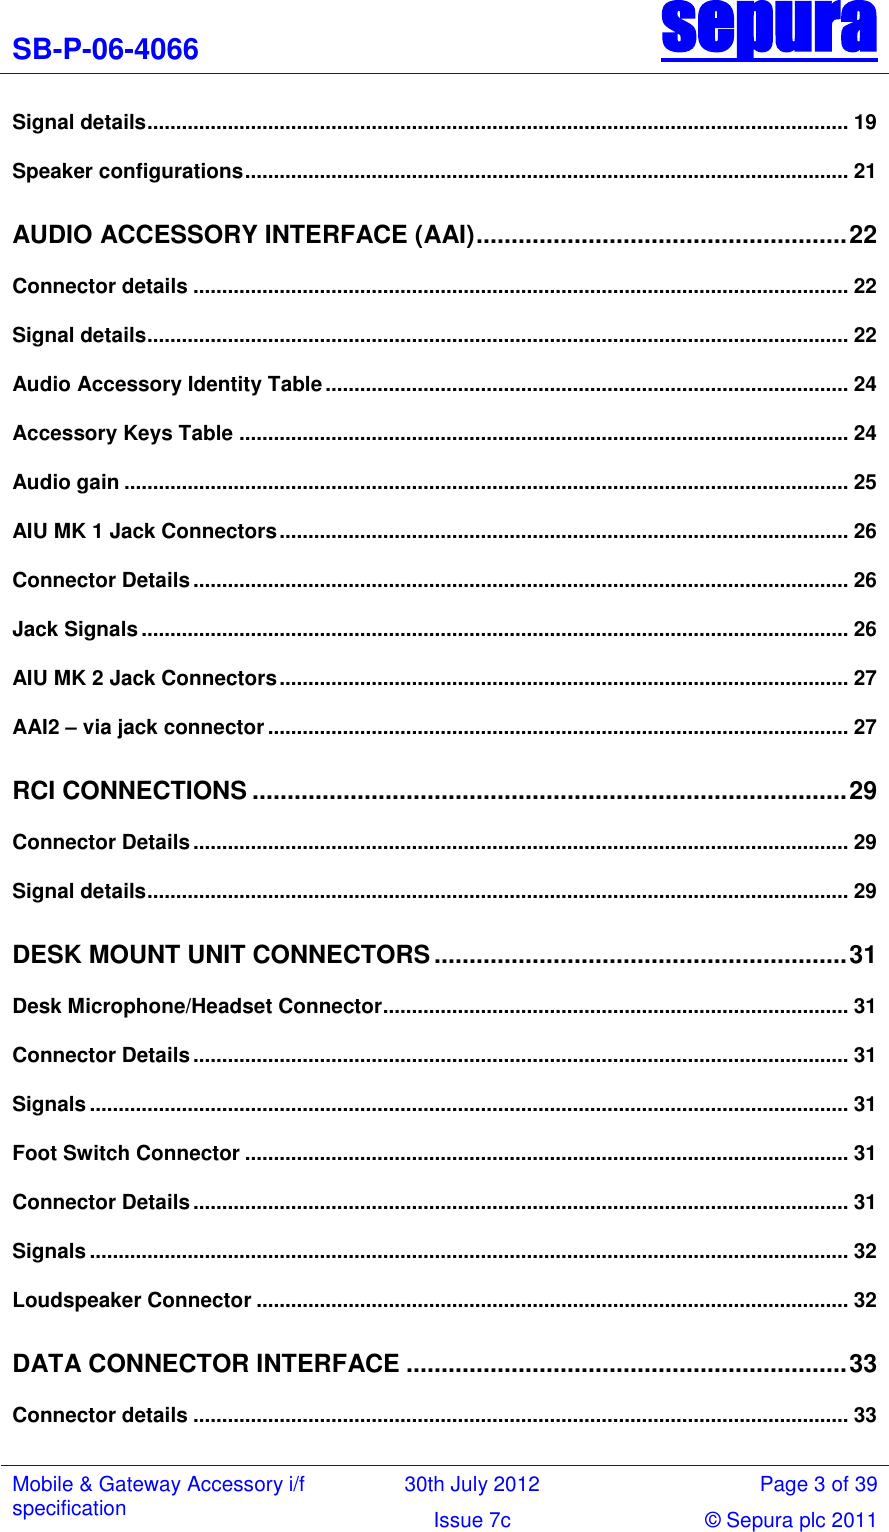 SB-P-06-4066 sepura  Mobile &amp; Gateway Accessory i/f specification 30th July 2012 Page 3 of 39 Issue 7c © Sepura plc 2011   Signal details .......................................................................................................................... 19 Speaker configurations ......................................................................................................... 21 AUDIO ACCESSORY INTERFACE (AAI) ..................................................... 22 Connector details .................................................................................................................. 22 Signal details .......................................................................................................................... 22 Audio Accessory Identity Table ........................................................................................... 24 Accessory Keys Table .......................................................................................................... 24 Audio gain .............................................................................................................................. 25 AIU MK 1 Jack Connectors ................................................................................................... 26 Connector Details .................................................................................................................. 26 Jack Signals ........................................................................................................................... 26 AIU MK 2 Jack Connectors ................................................................................................... 27 AAI2 – via jack connector ..................................................................................................... 27 RCI CONNECTIONS ..................................................................................... 29 Connector Details .................................................................................................................. 29 Signal details .......................................................................................................................... 29 DESK MOUNT UNIT CONNECTORS ........................................................... 31 Desk Microphone/Headset Connector................................................................................. 31 Connector Details .................................................................................................................. 31 Signals .................................................................................................................................... 31 Foot Switch Connector ......................................................................................................... 31 Connector Details .................................................................................................................. 31 Signals .................................................................................................................................... 32 Loudspeaker Connector ....................................................................................................... 32 DATA CONNECTOR INTERFACE ............................................................... 33 Connector details .................................................................................................................. 33 